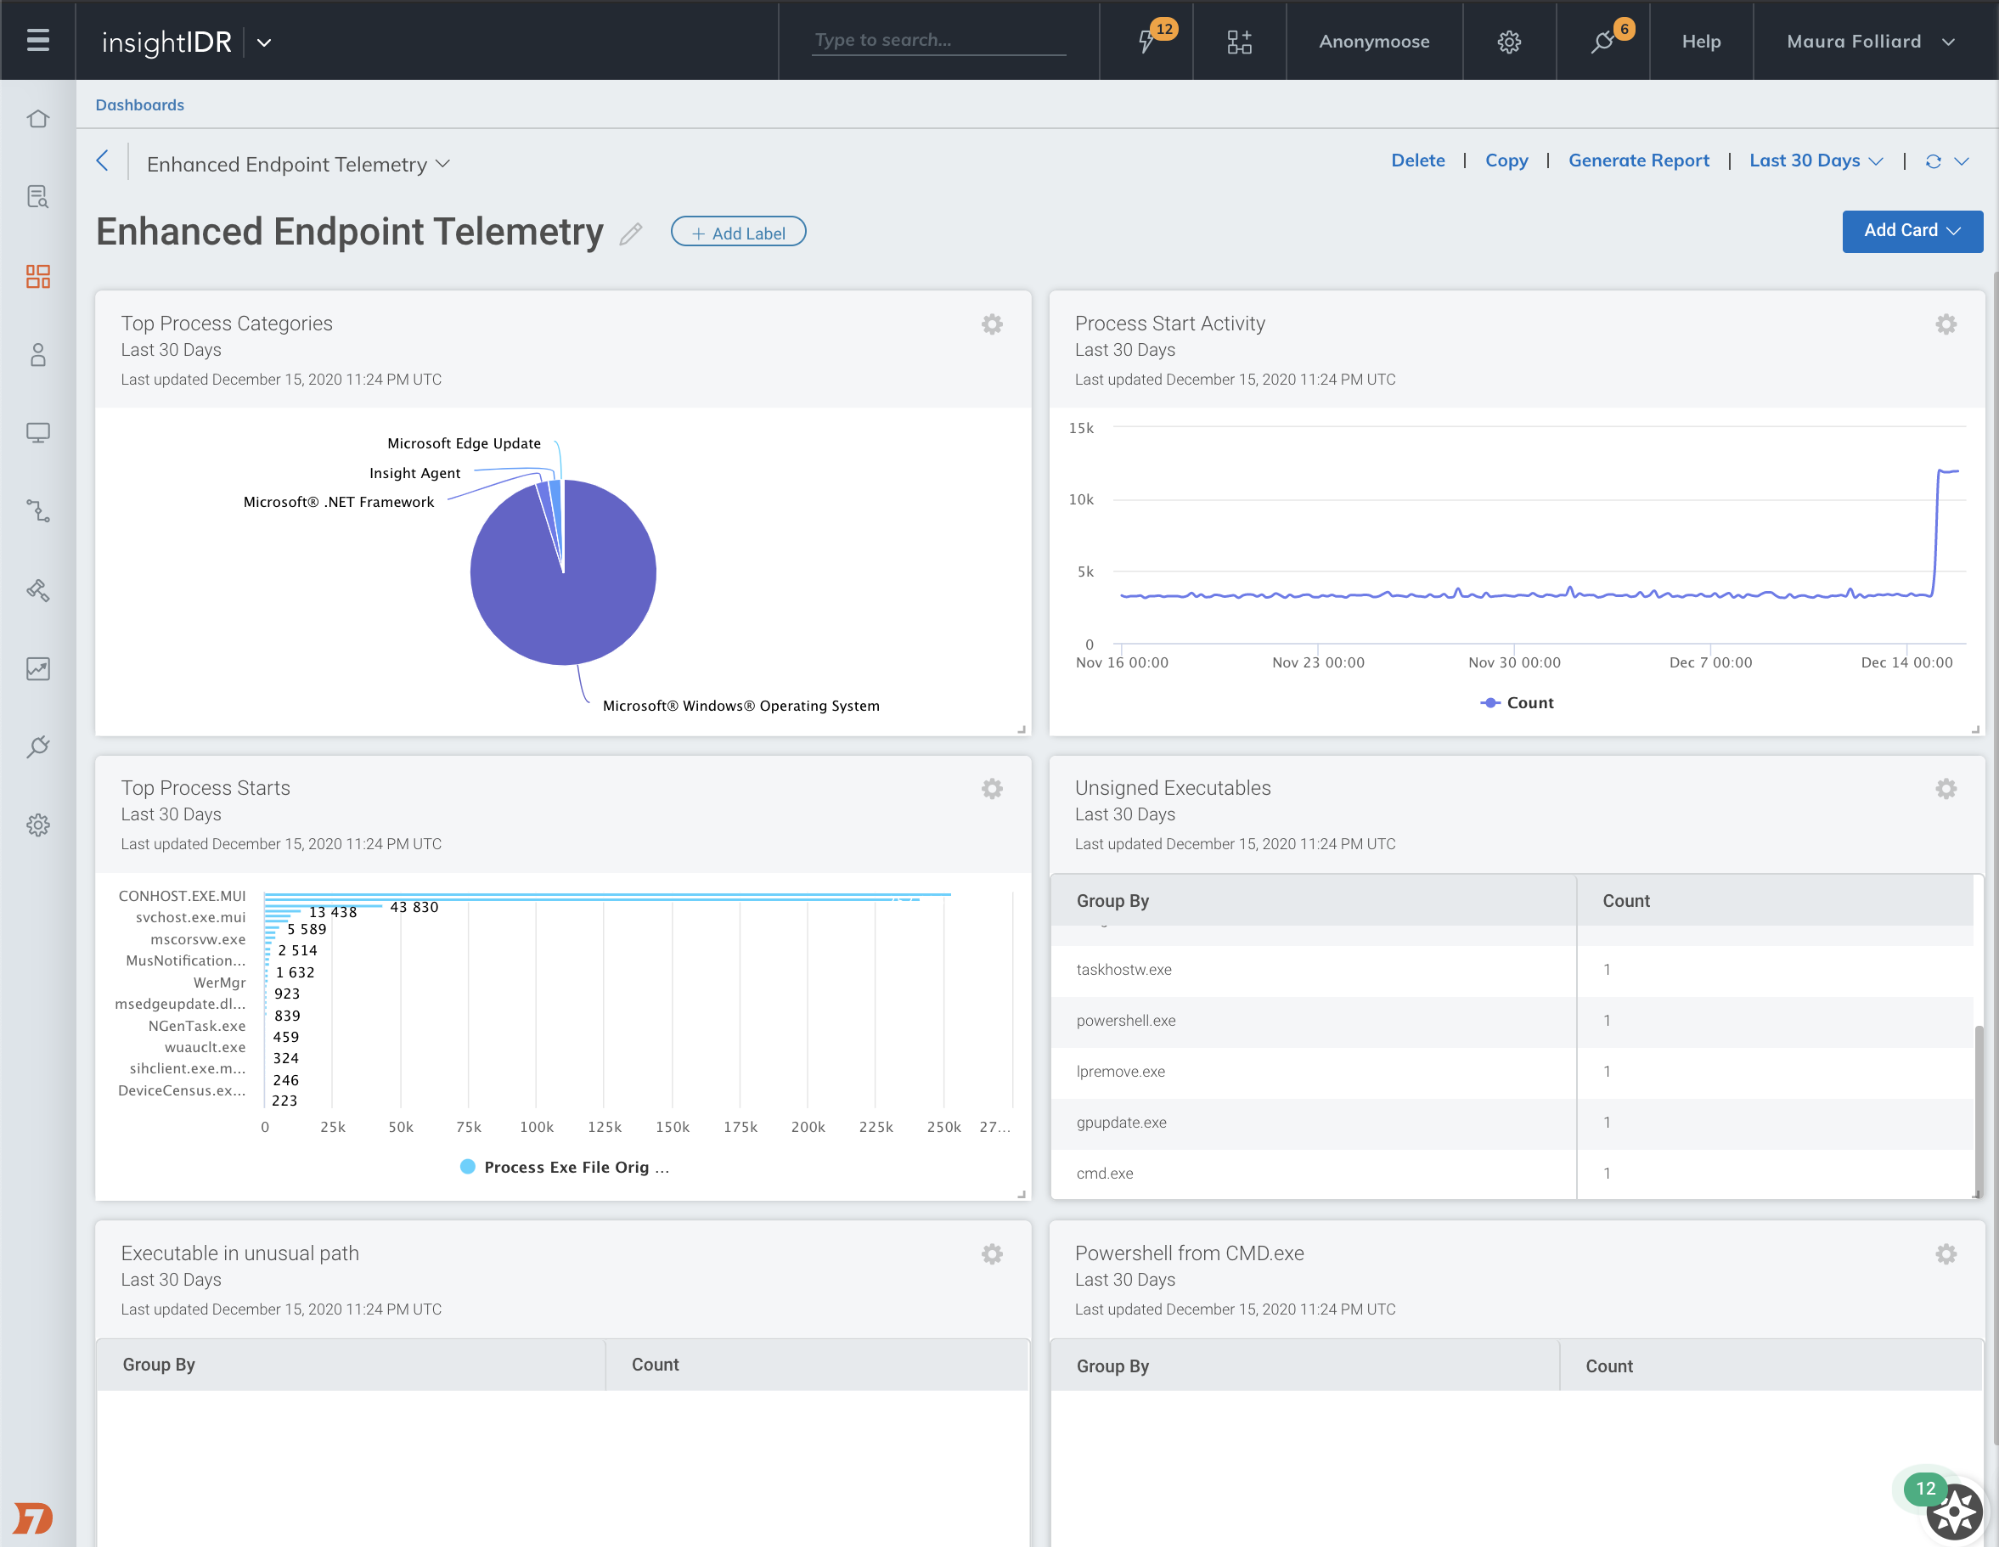 A look at an Enhanced Endpoint Telemetry (EET) dashboard card in Rapid7 InsightIDR.